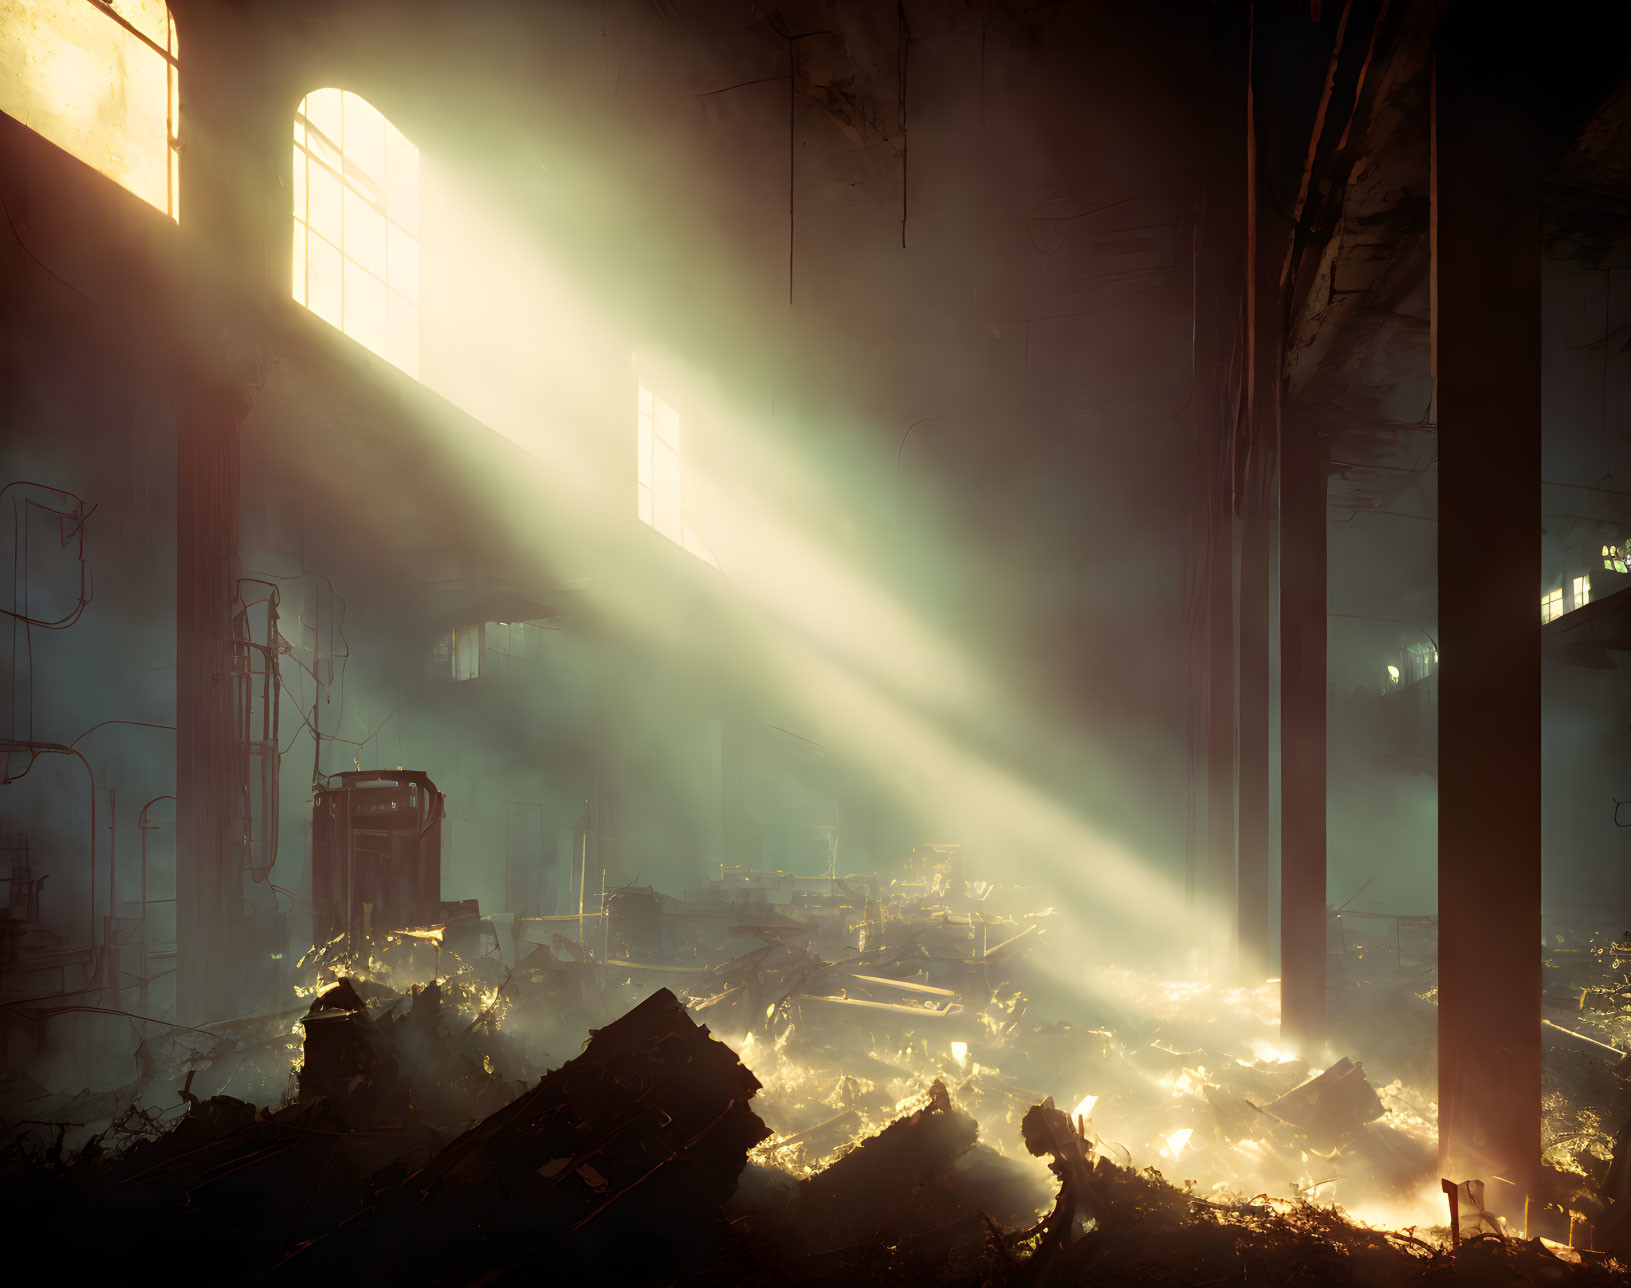 Abandoned factory with sunbeams through large arched window